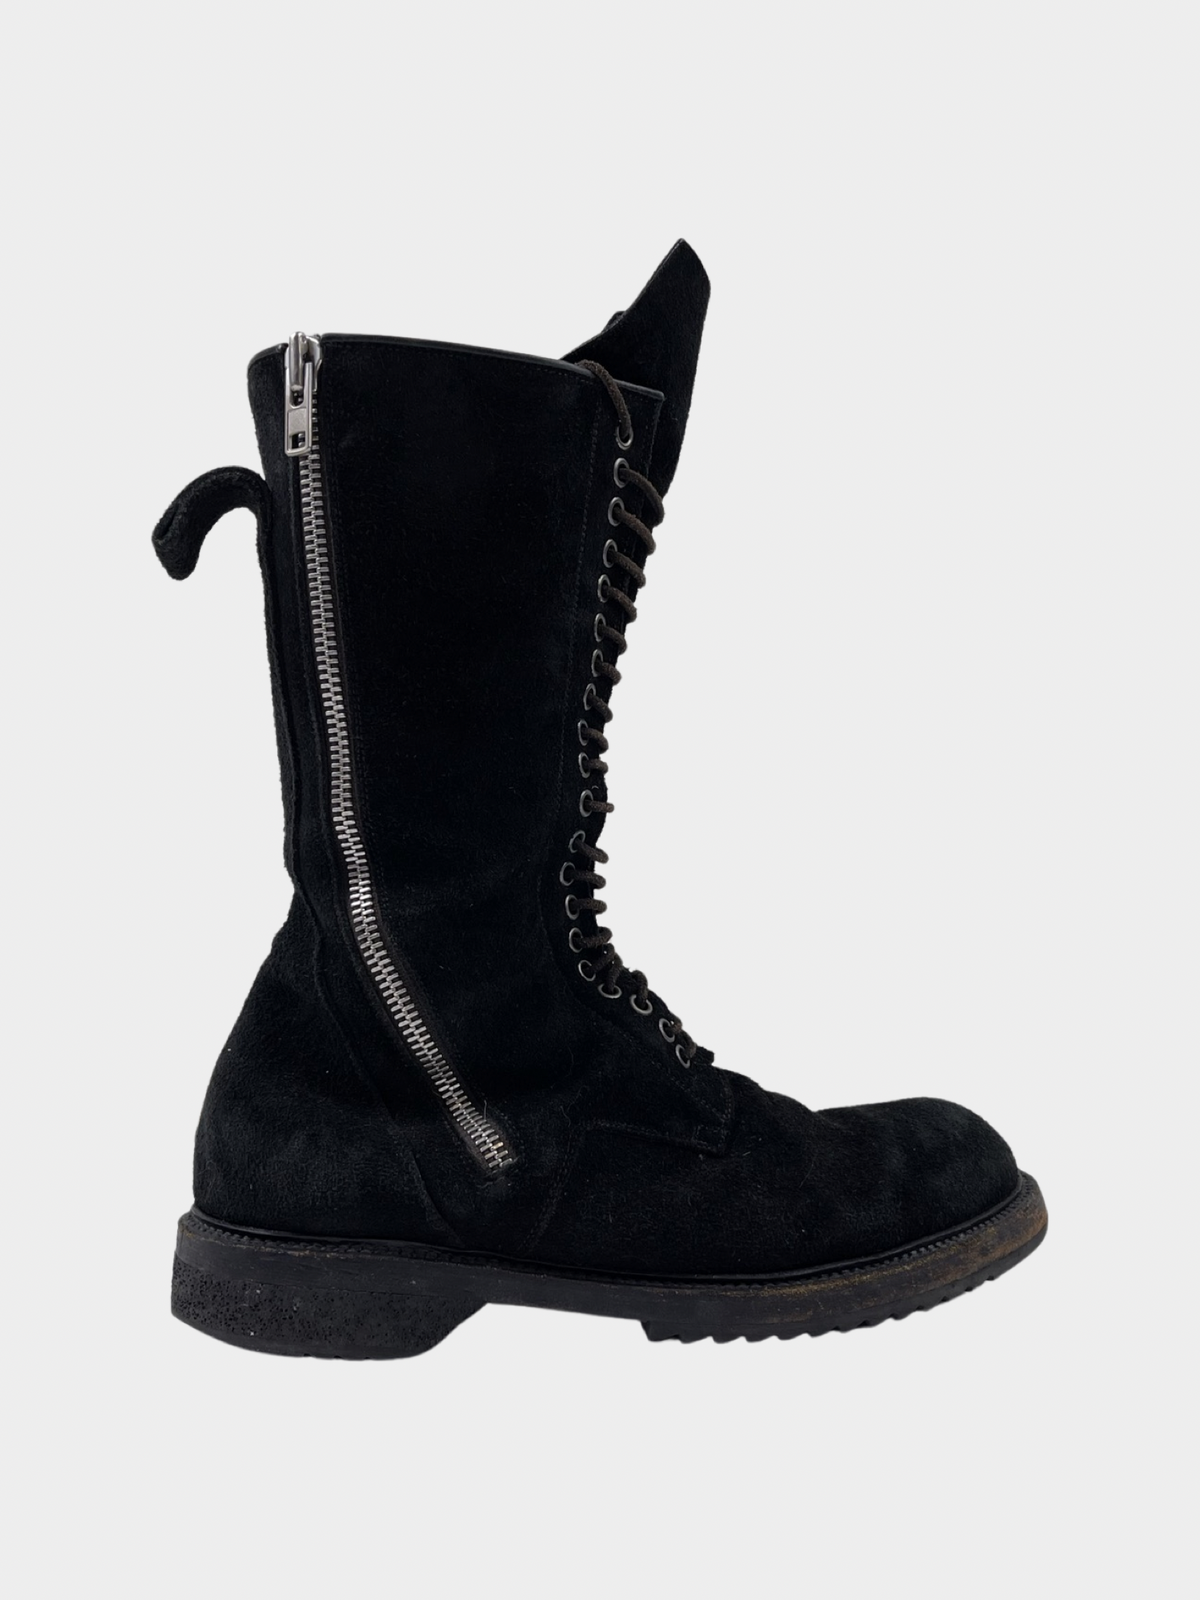 RICK OWENS Blistered Leather Double-Zip Combat Boots - ARCHIVED